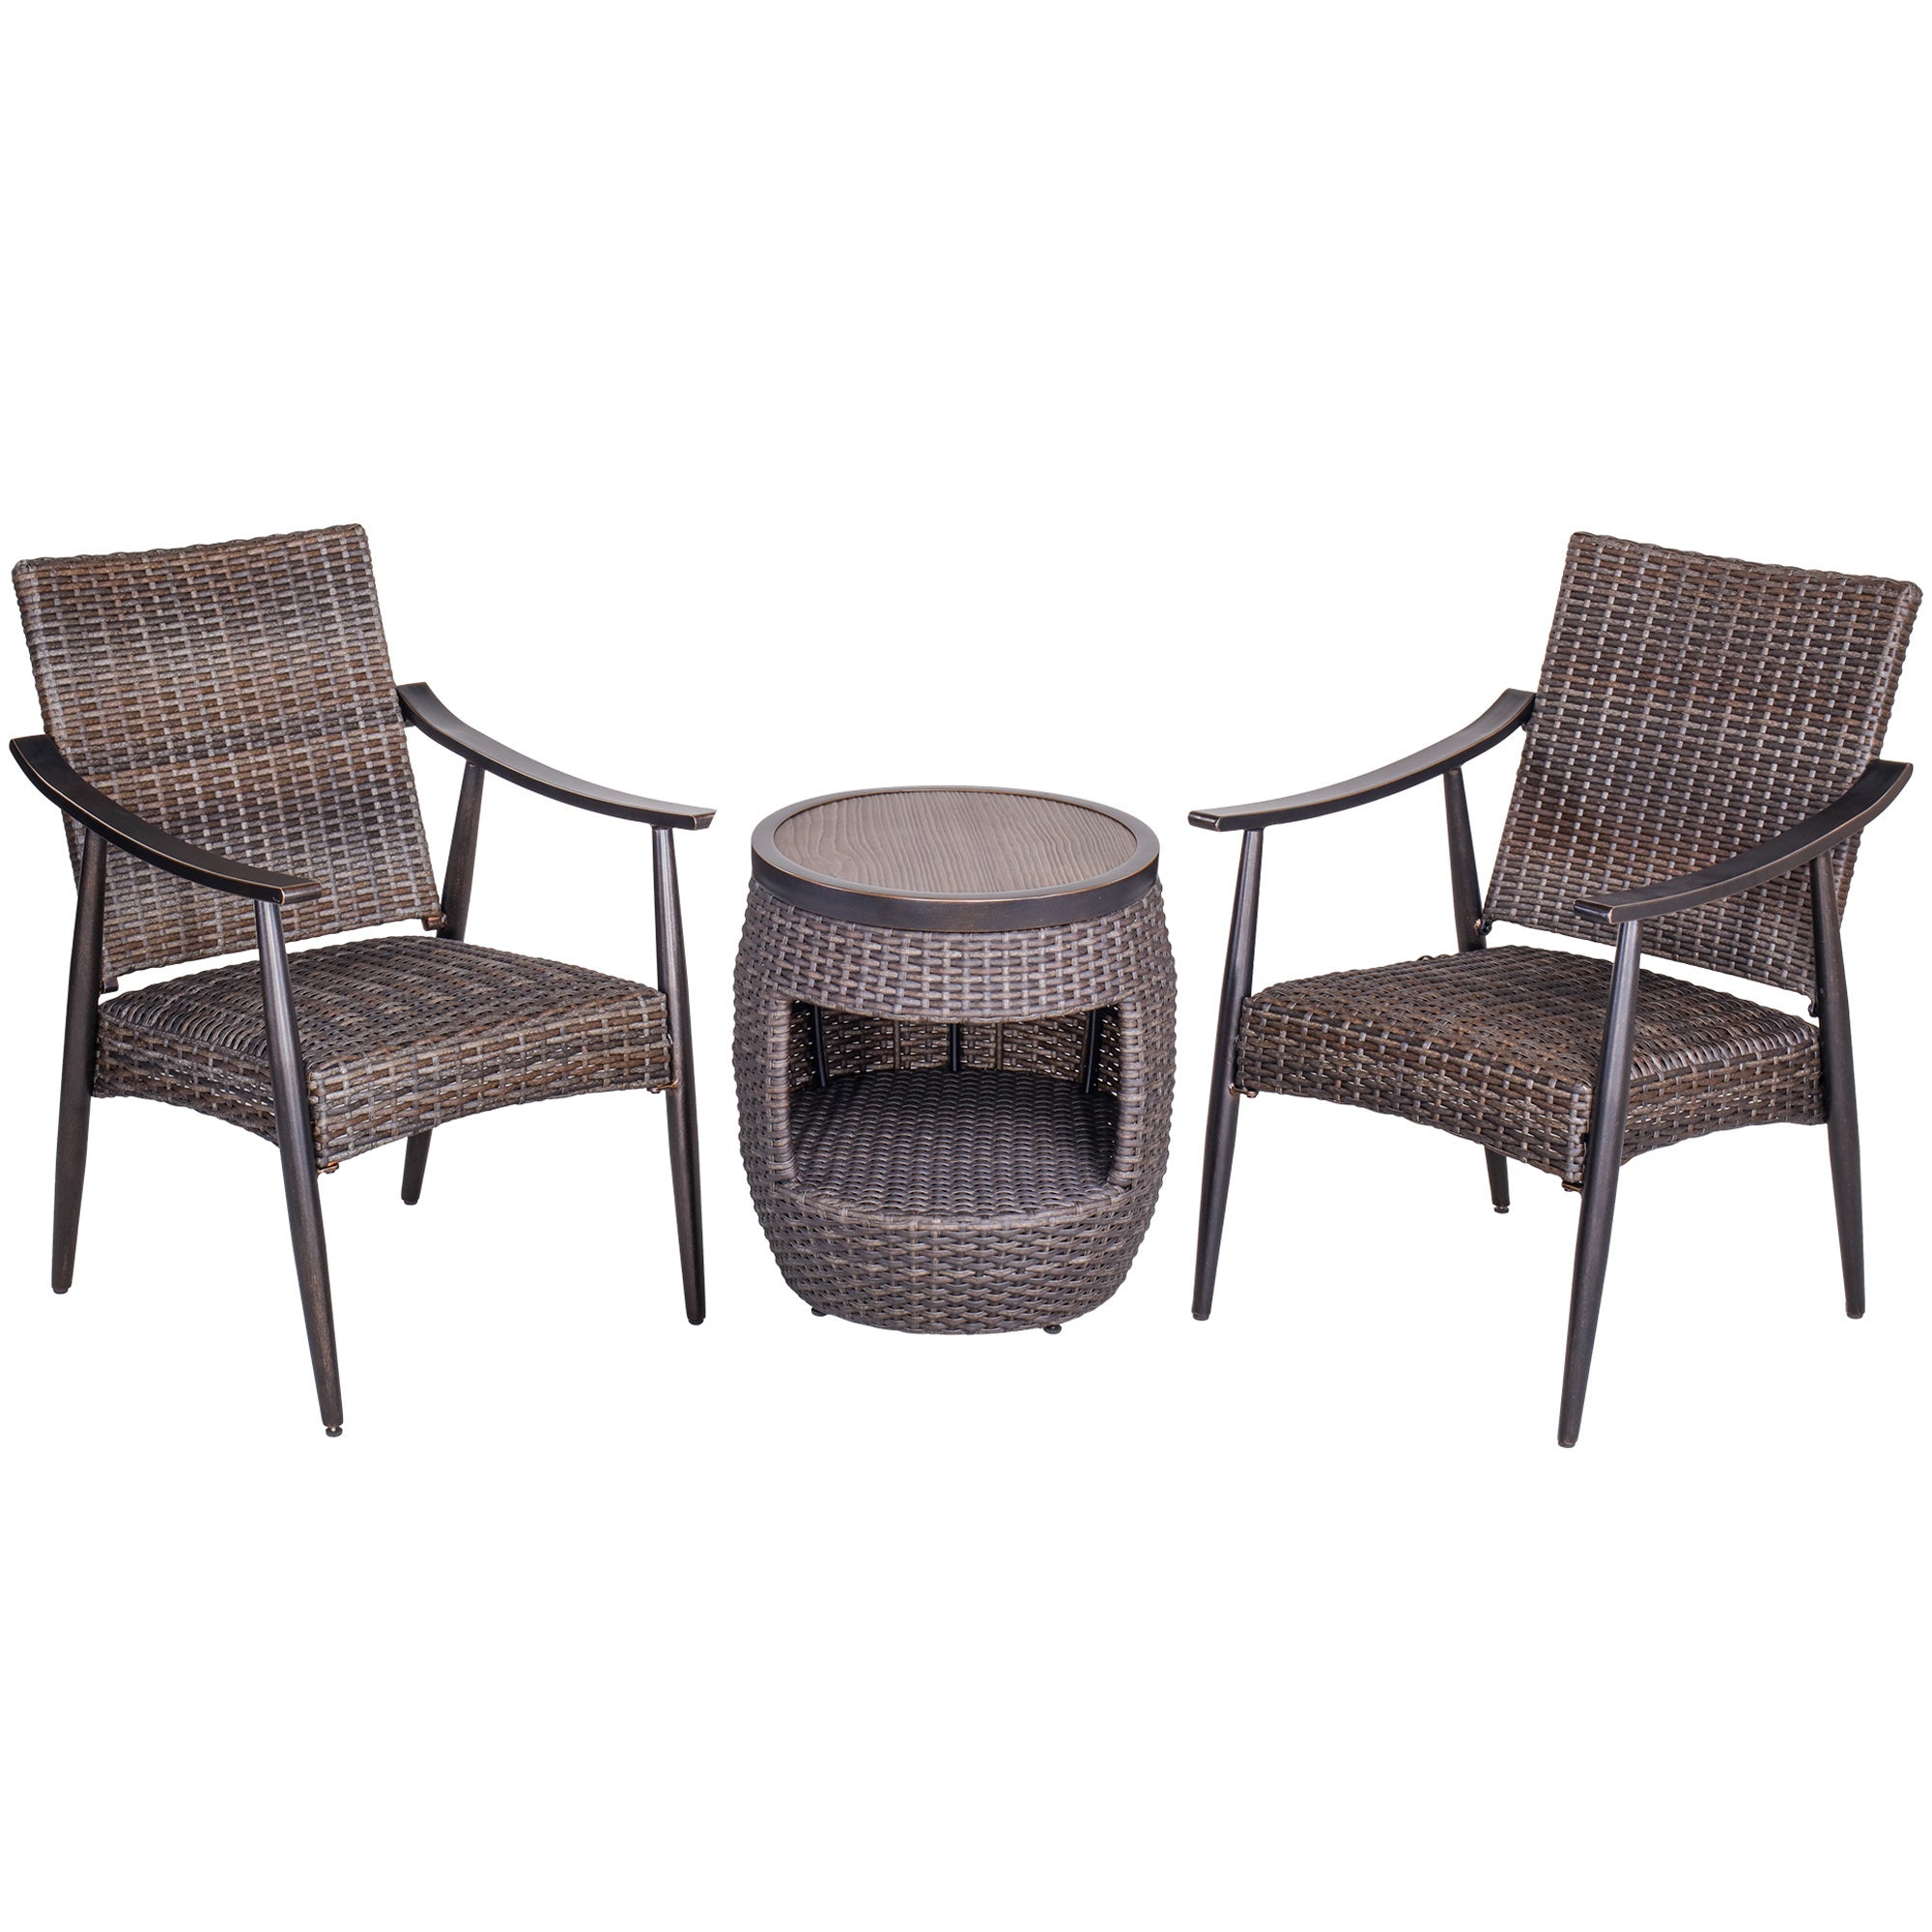 [Dropshipping] 3 Piece Patio Conversation Set Outdoor Bistro Furniture, Wicker Mid-Century Style Chair with Crafttech Top Wicker Coffee Table